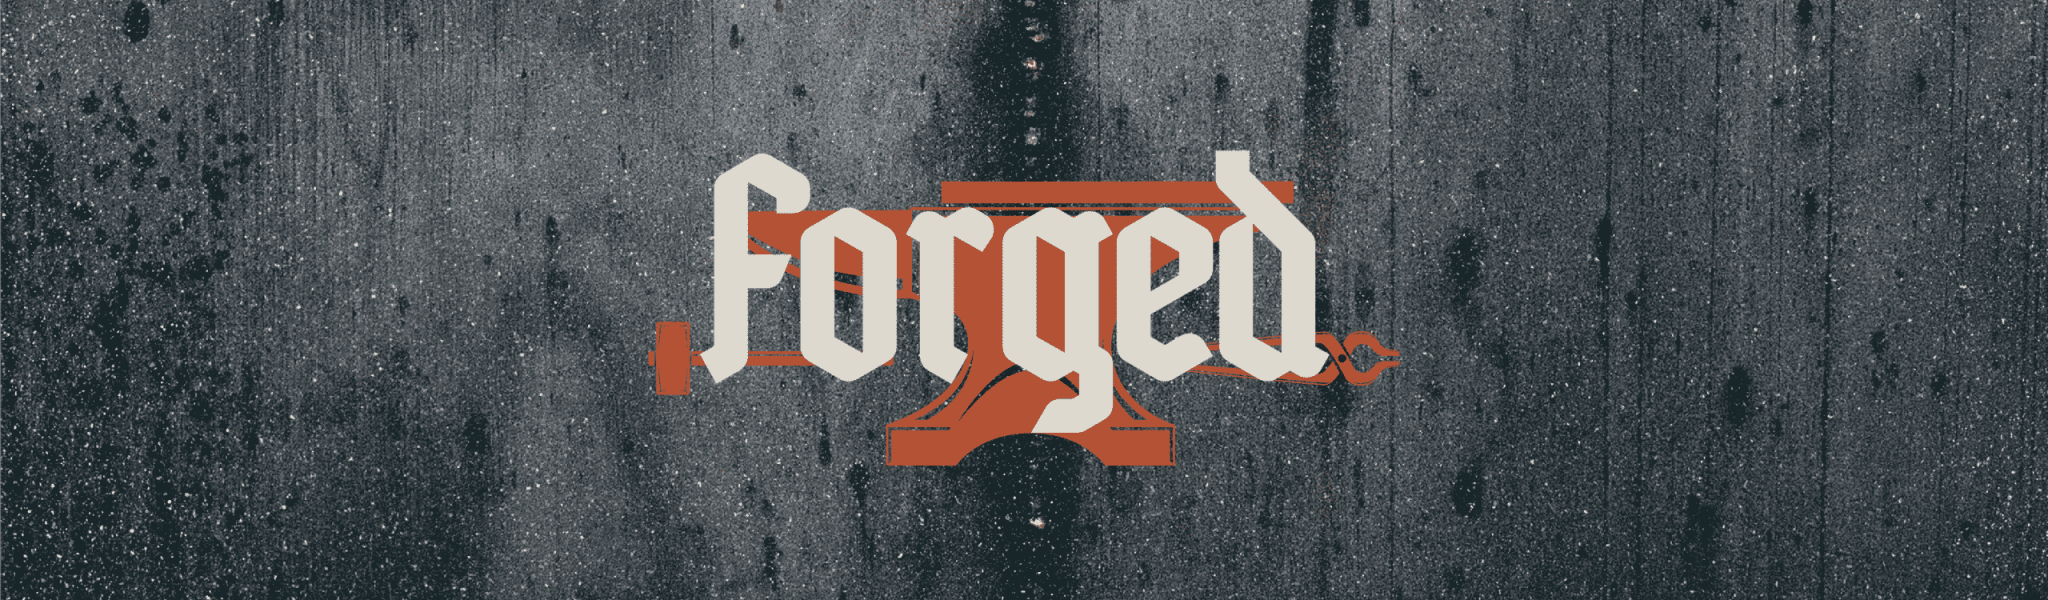 Forged_Banner